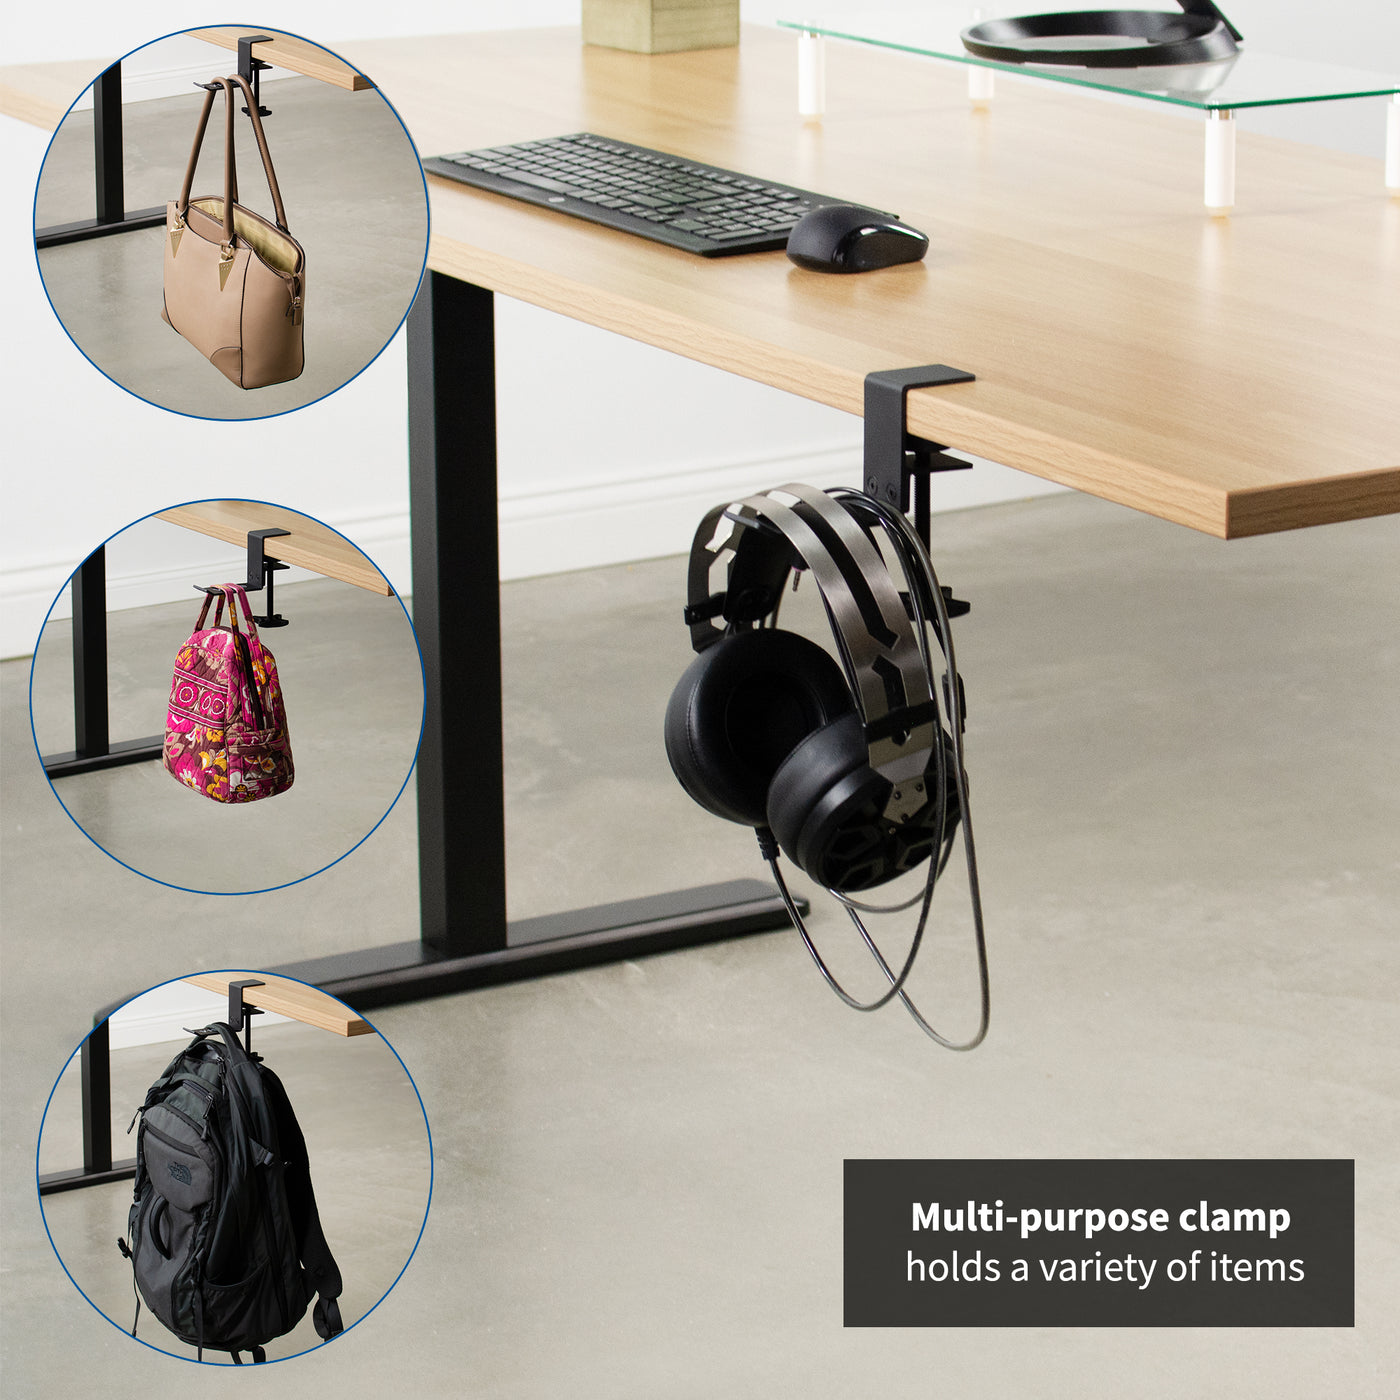 Multi-purpose clamp on desk hook that supports backpacks, purses, headphones, lunchboxes, and more.